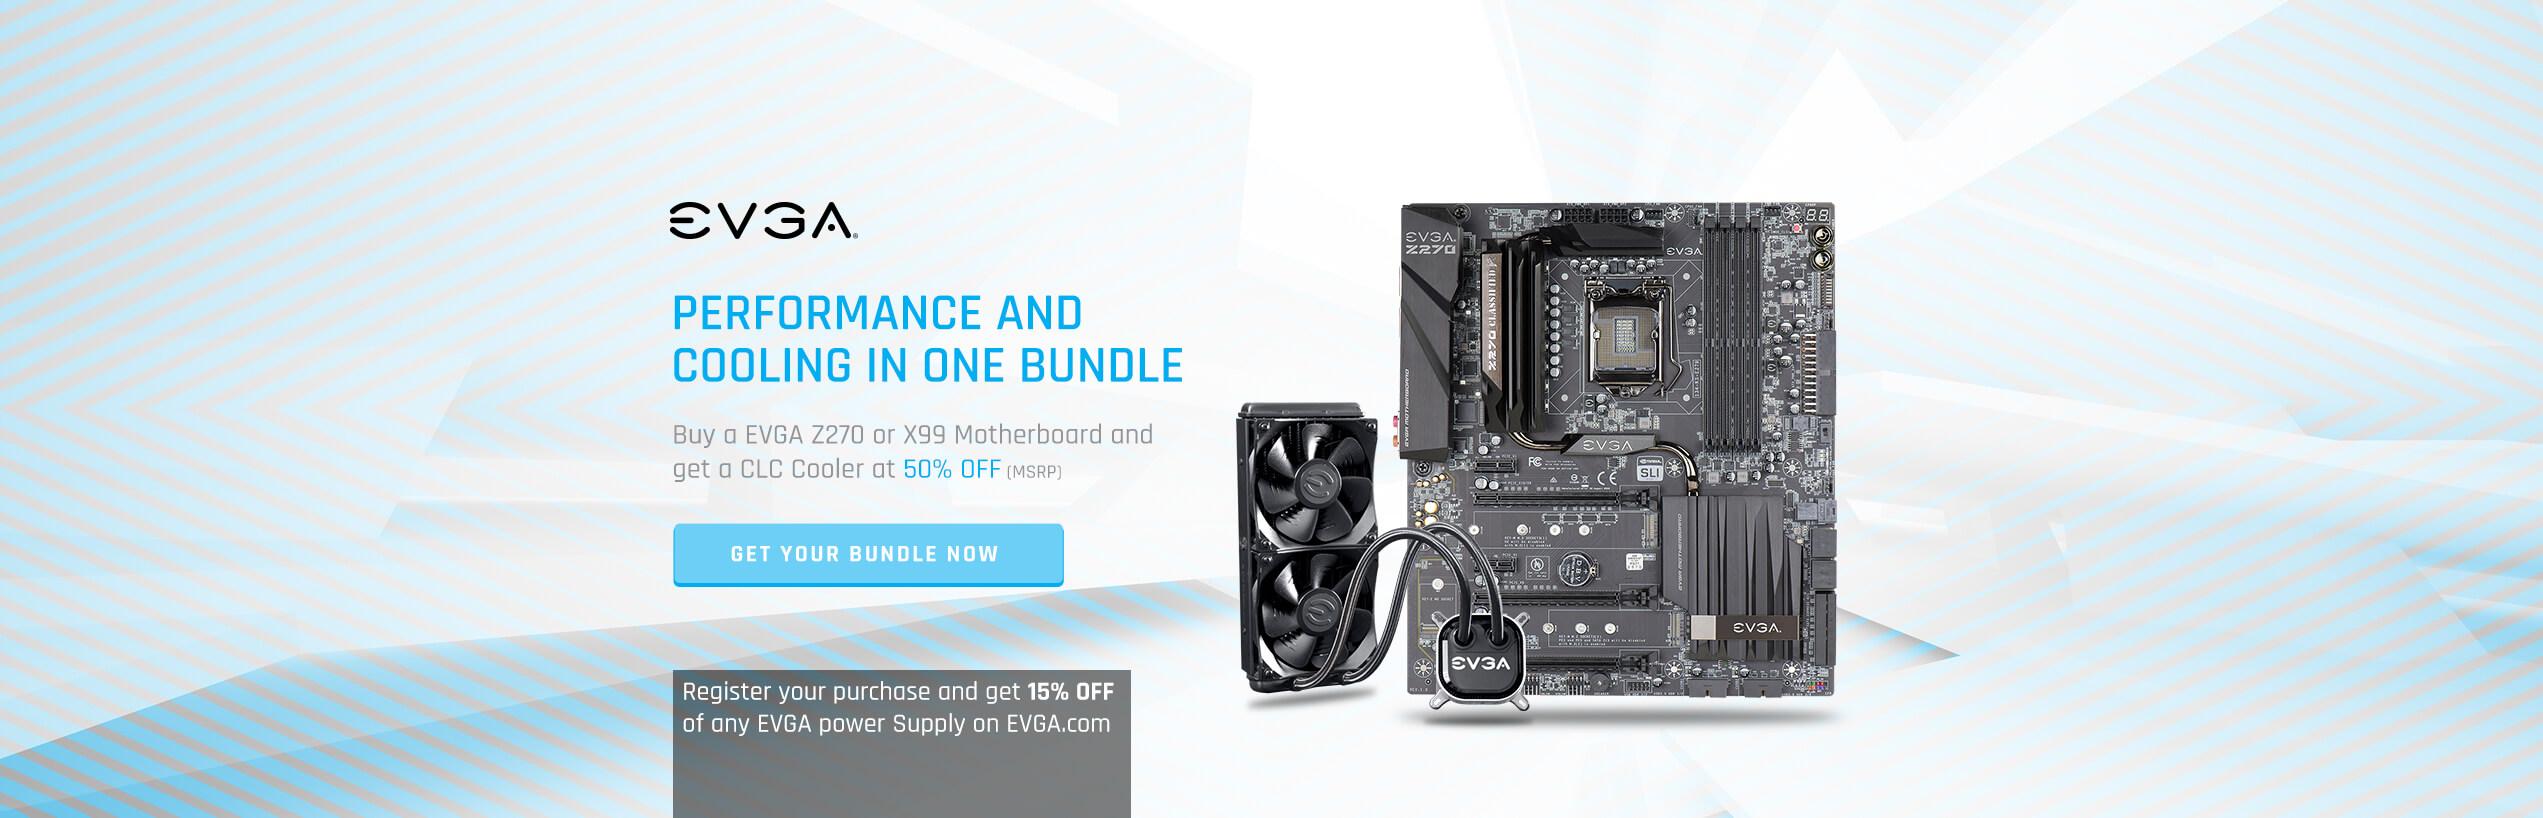 Performance and Cooling in One Bundle